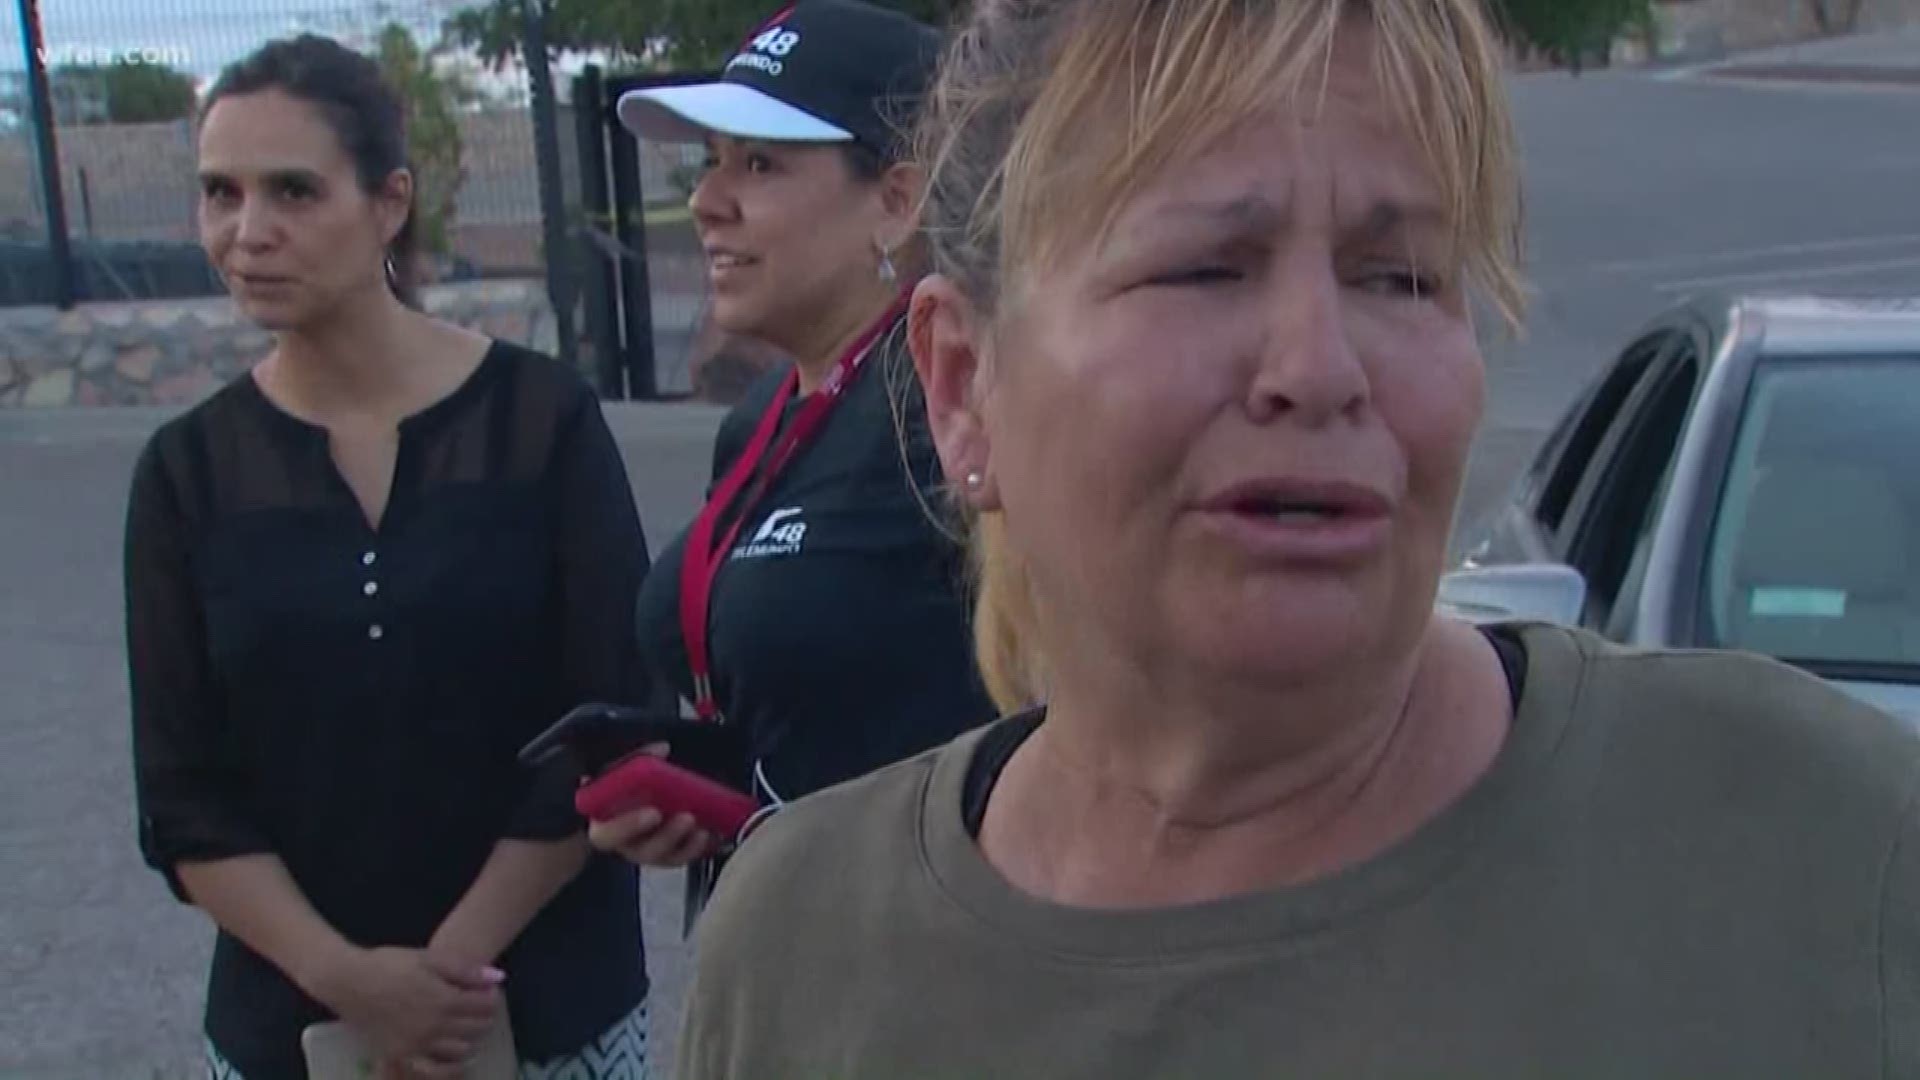 One woman has been looking for her mother all day long. A prayer vigil was held in El Paso Saturday night. And many local funeral homes are offering free funerals for victims.